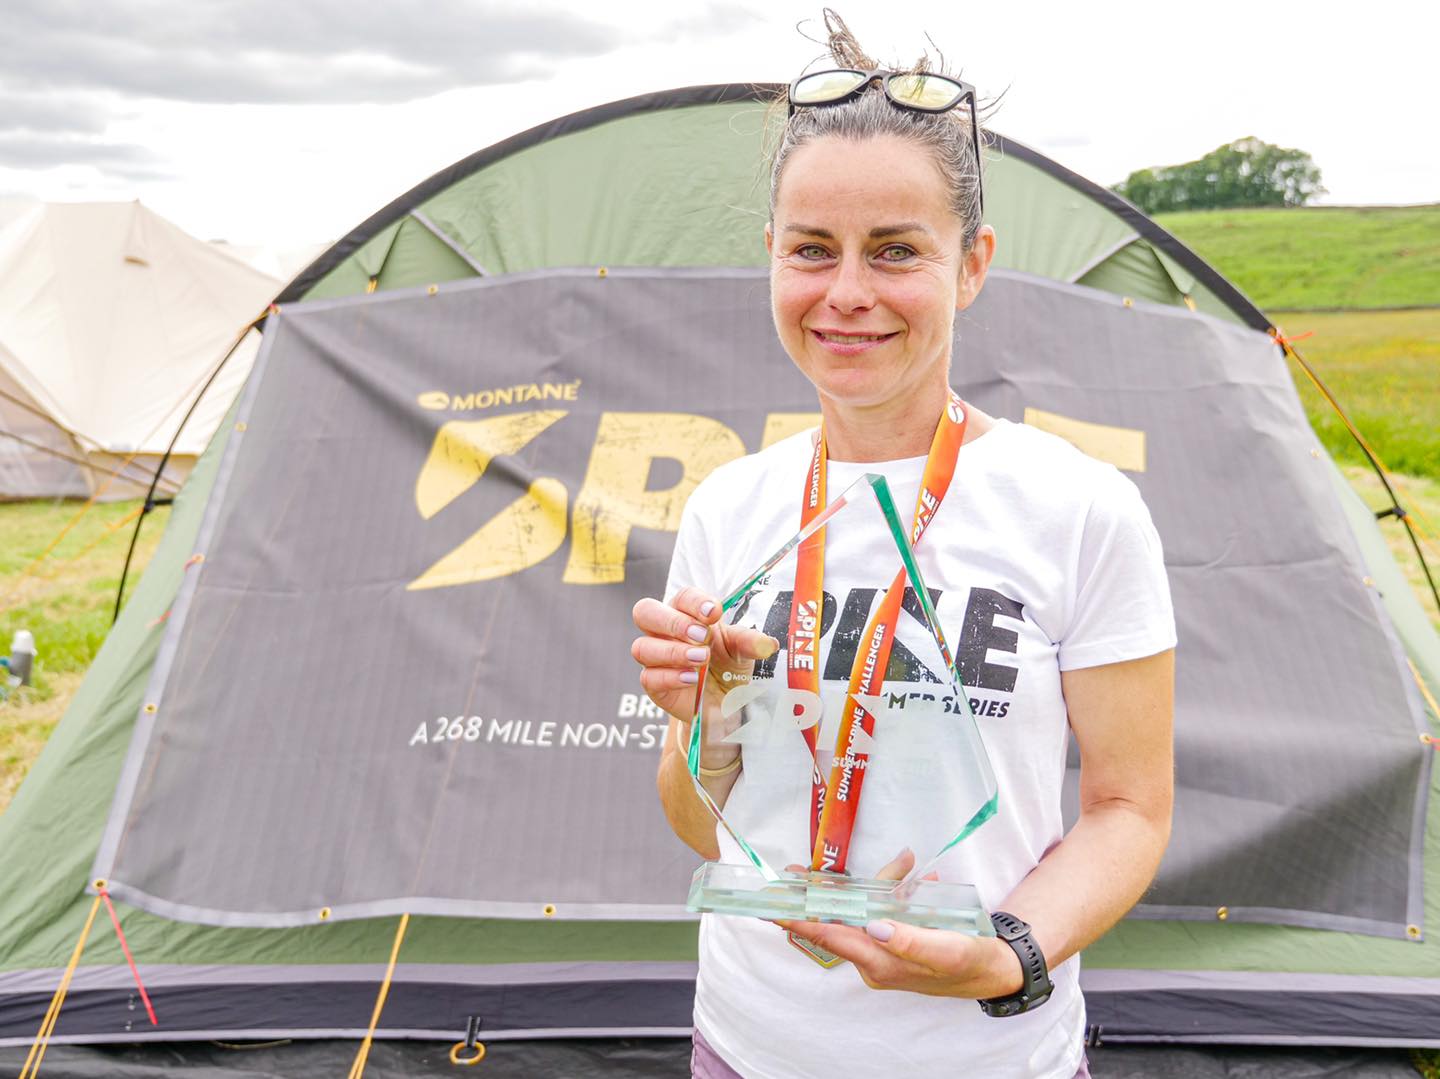 Mairead takes on the Montane Spine Race Challenger